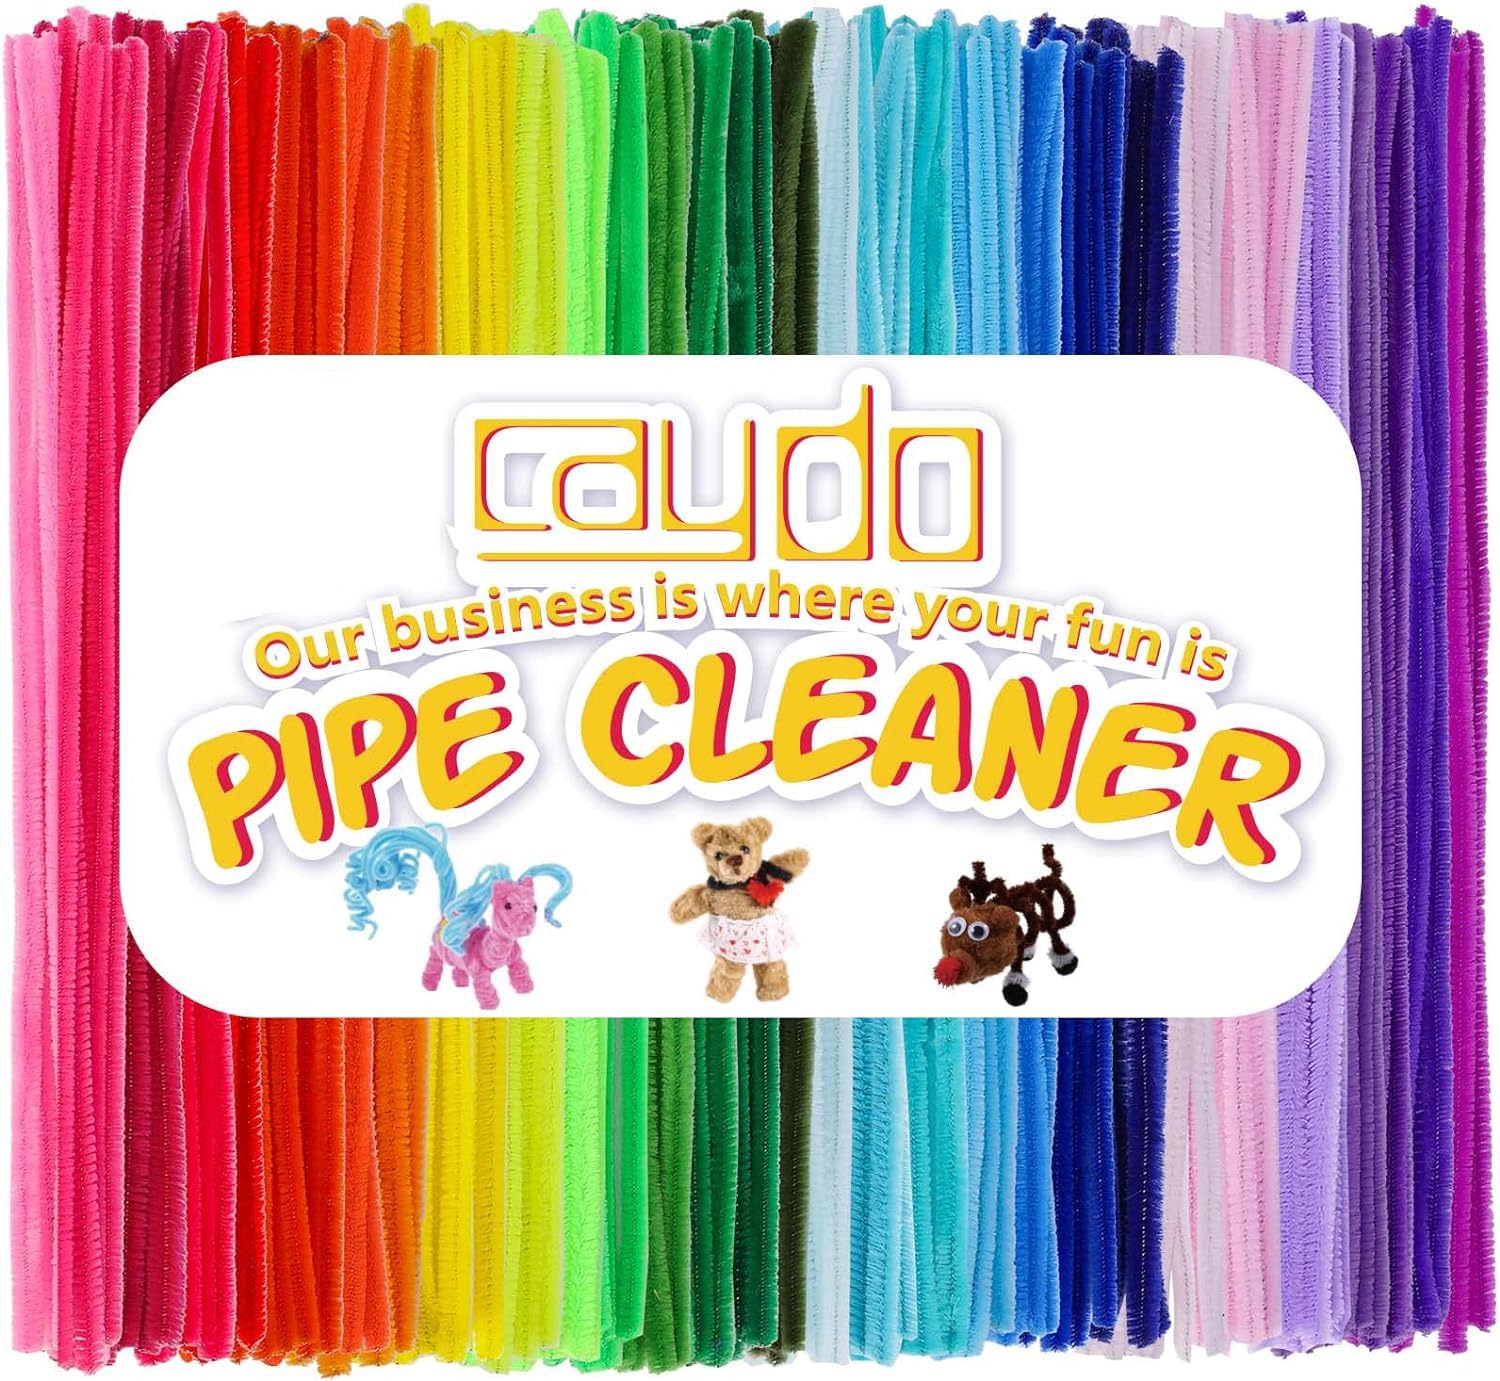 360 Pieces Pipe Cleaners 40 Assorted Colored Chenille Stems